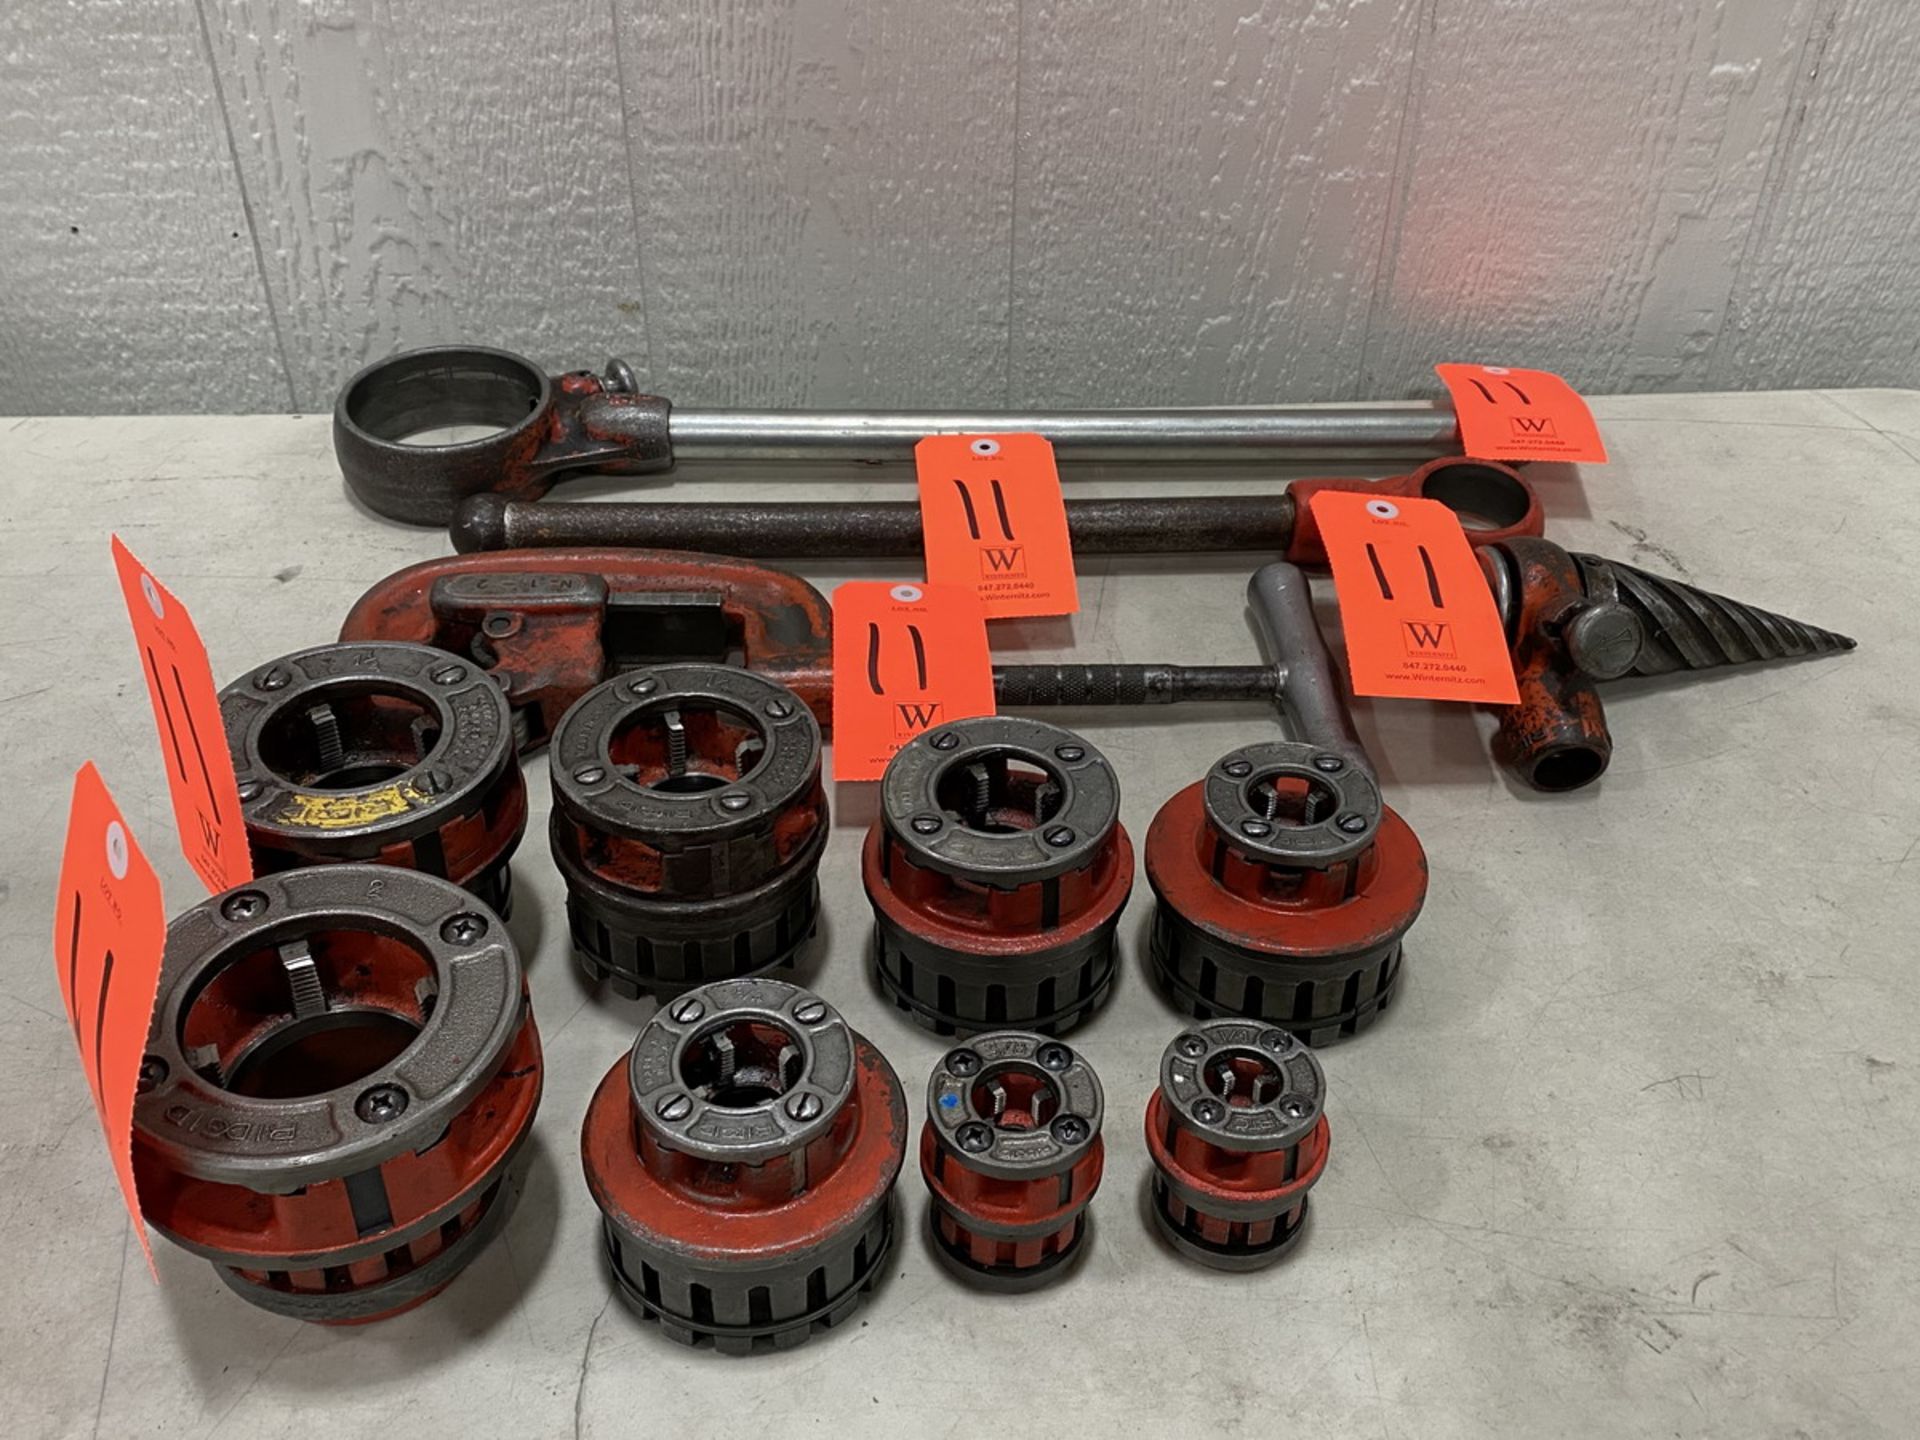 Lot - Ridgid Exposed Ratchet Threader; to Include: (2) Ratchet Handles, (1) Pipe Reamer, (1) Pipe